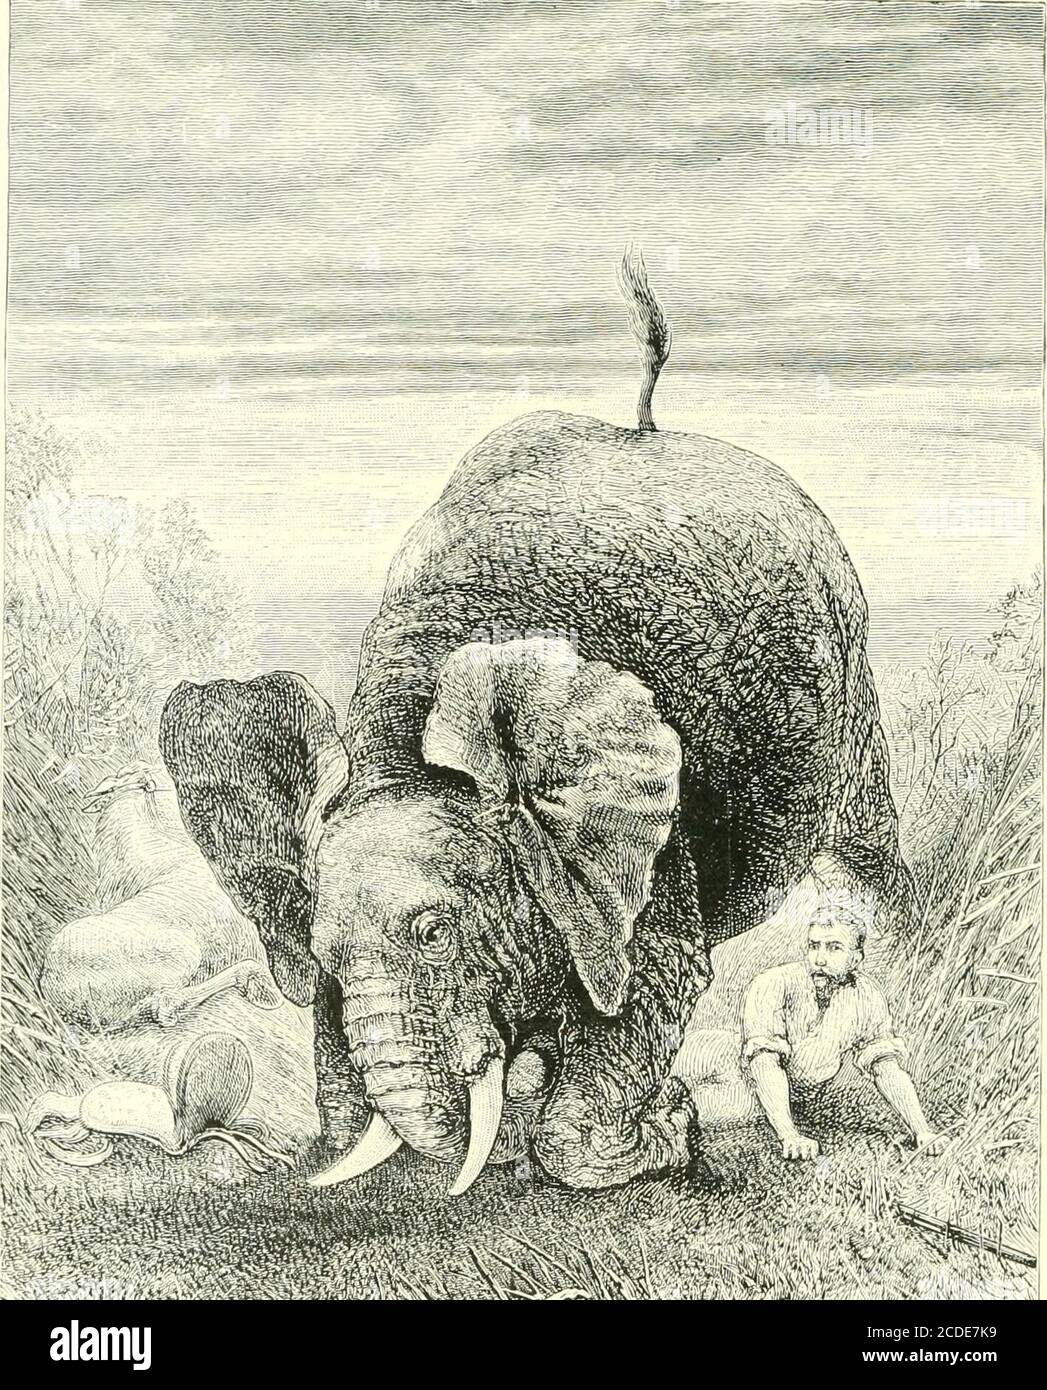 . A hunter's wanderings in Africa, being a narrative of nine years spent amongst the game of the far interior of South Africa, containing accounts of explorations beyond the Zambesi, on the river Chobe, and in the Matabele and Mashuna countries, with full notes upon the natural history and present distribution of all the large M  a m m a i a . &gt; - -J ^^ A NARROW ESCAPE; MASHUNA LAND, SEPTEMBER 17, 1S7S. Frc?itisp!ccc. o ^ , r» /- i^ee page -^b^. IW.KY A Hunters Wanderings in Afri rica ISO, BEING A NARRATIVE OF NINE YEARS SPENT AMONGST THEGAME OF THE FAR INTERIOR OF SOUTH AFRICA CONT.^INING Stock Photo